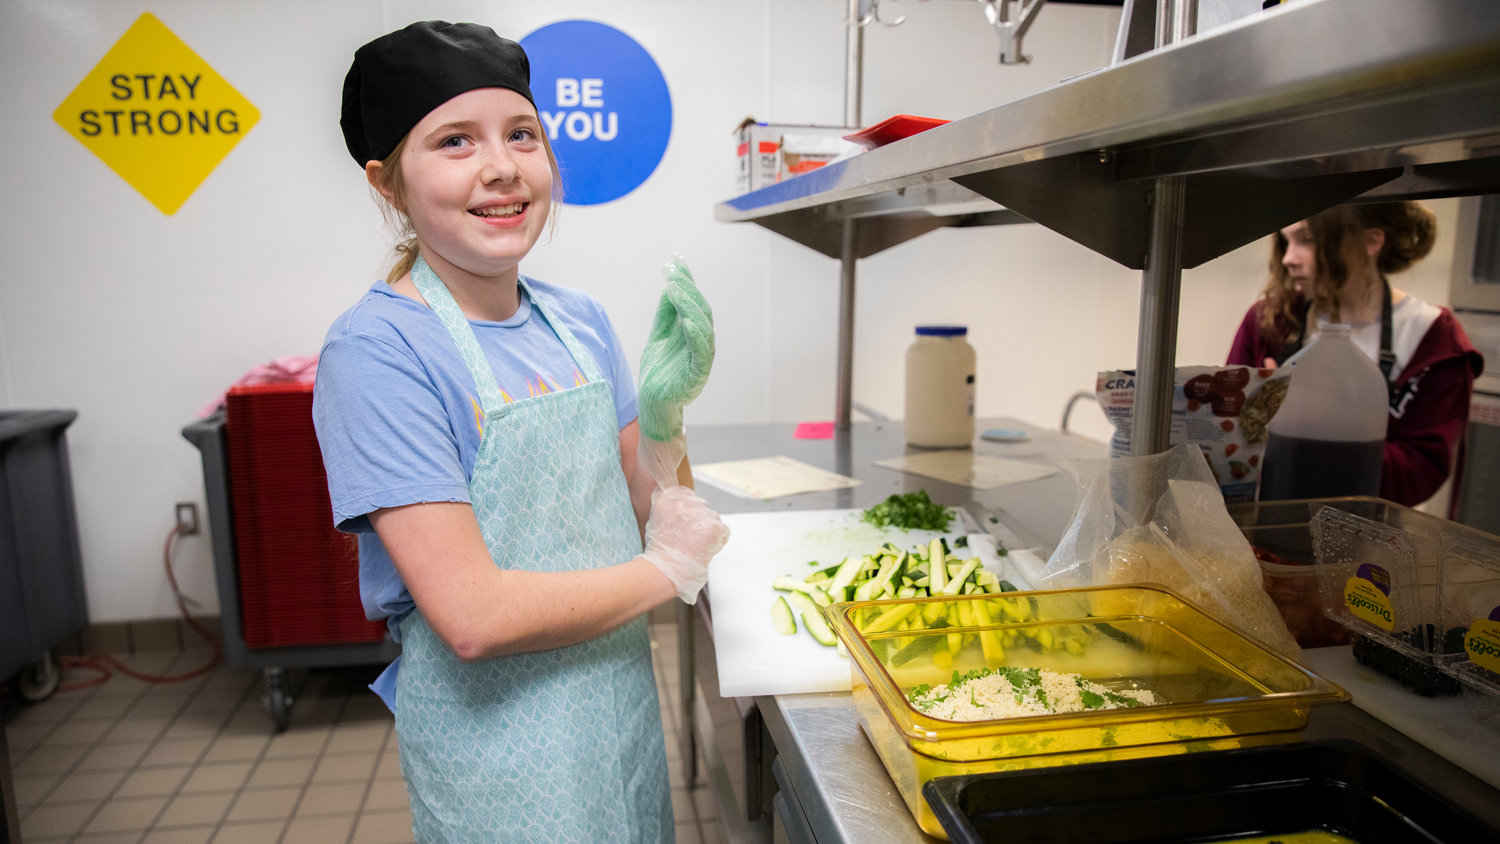 Tru Hamrick, 11, smiles while putting on gloves in preparation to make zucchini fries which would earn her the top spot in the Future Chefs National Challenge at Orin Smith Elementary in Chehalis on Thursday.